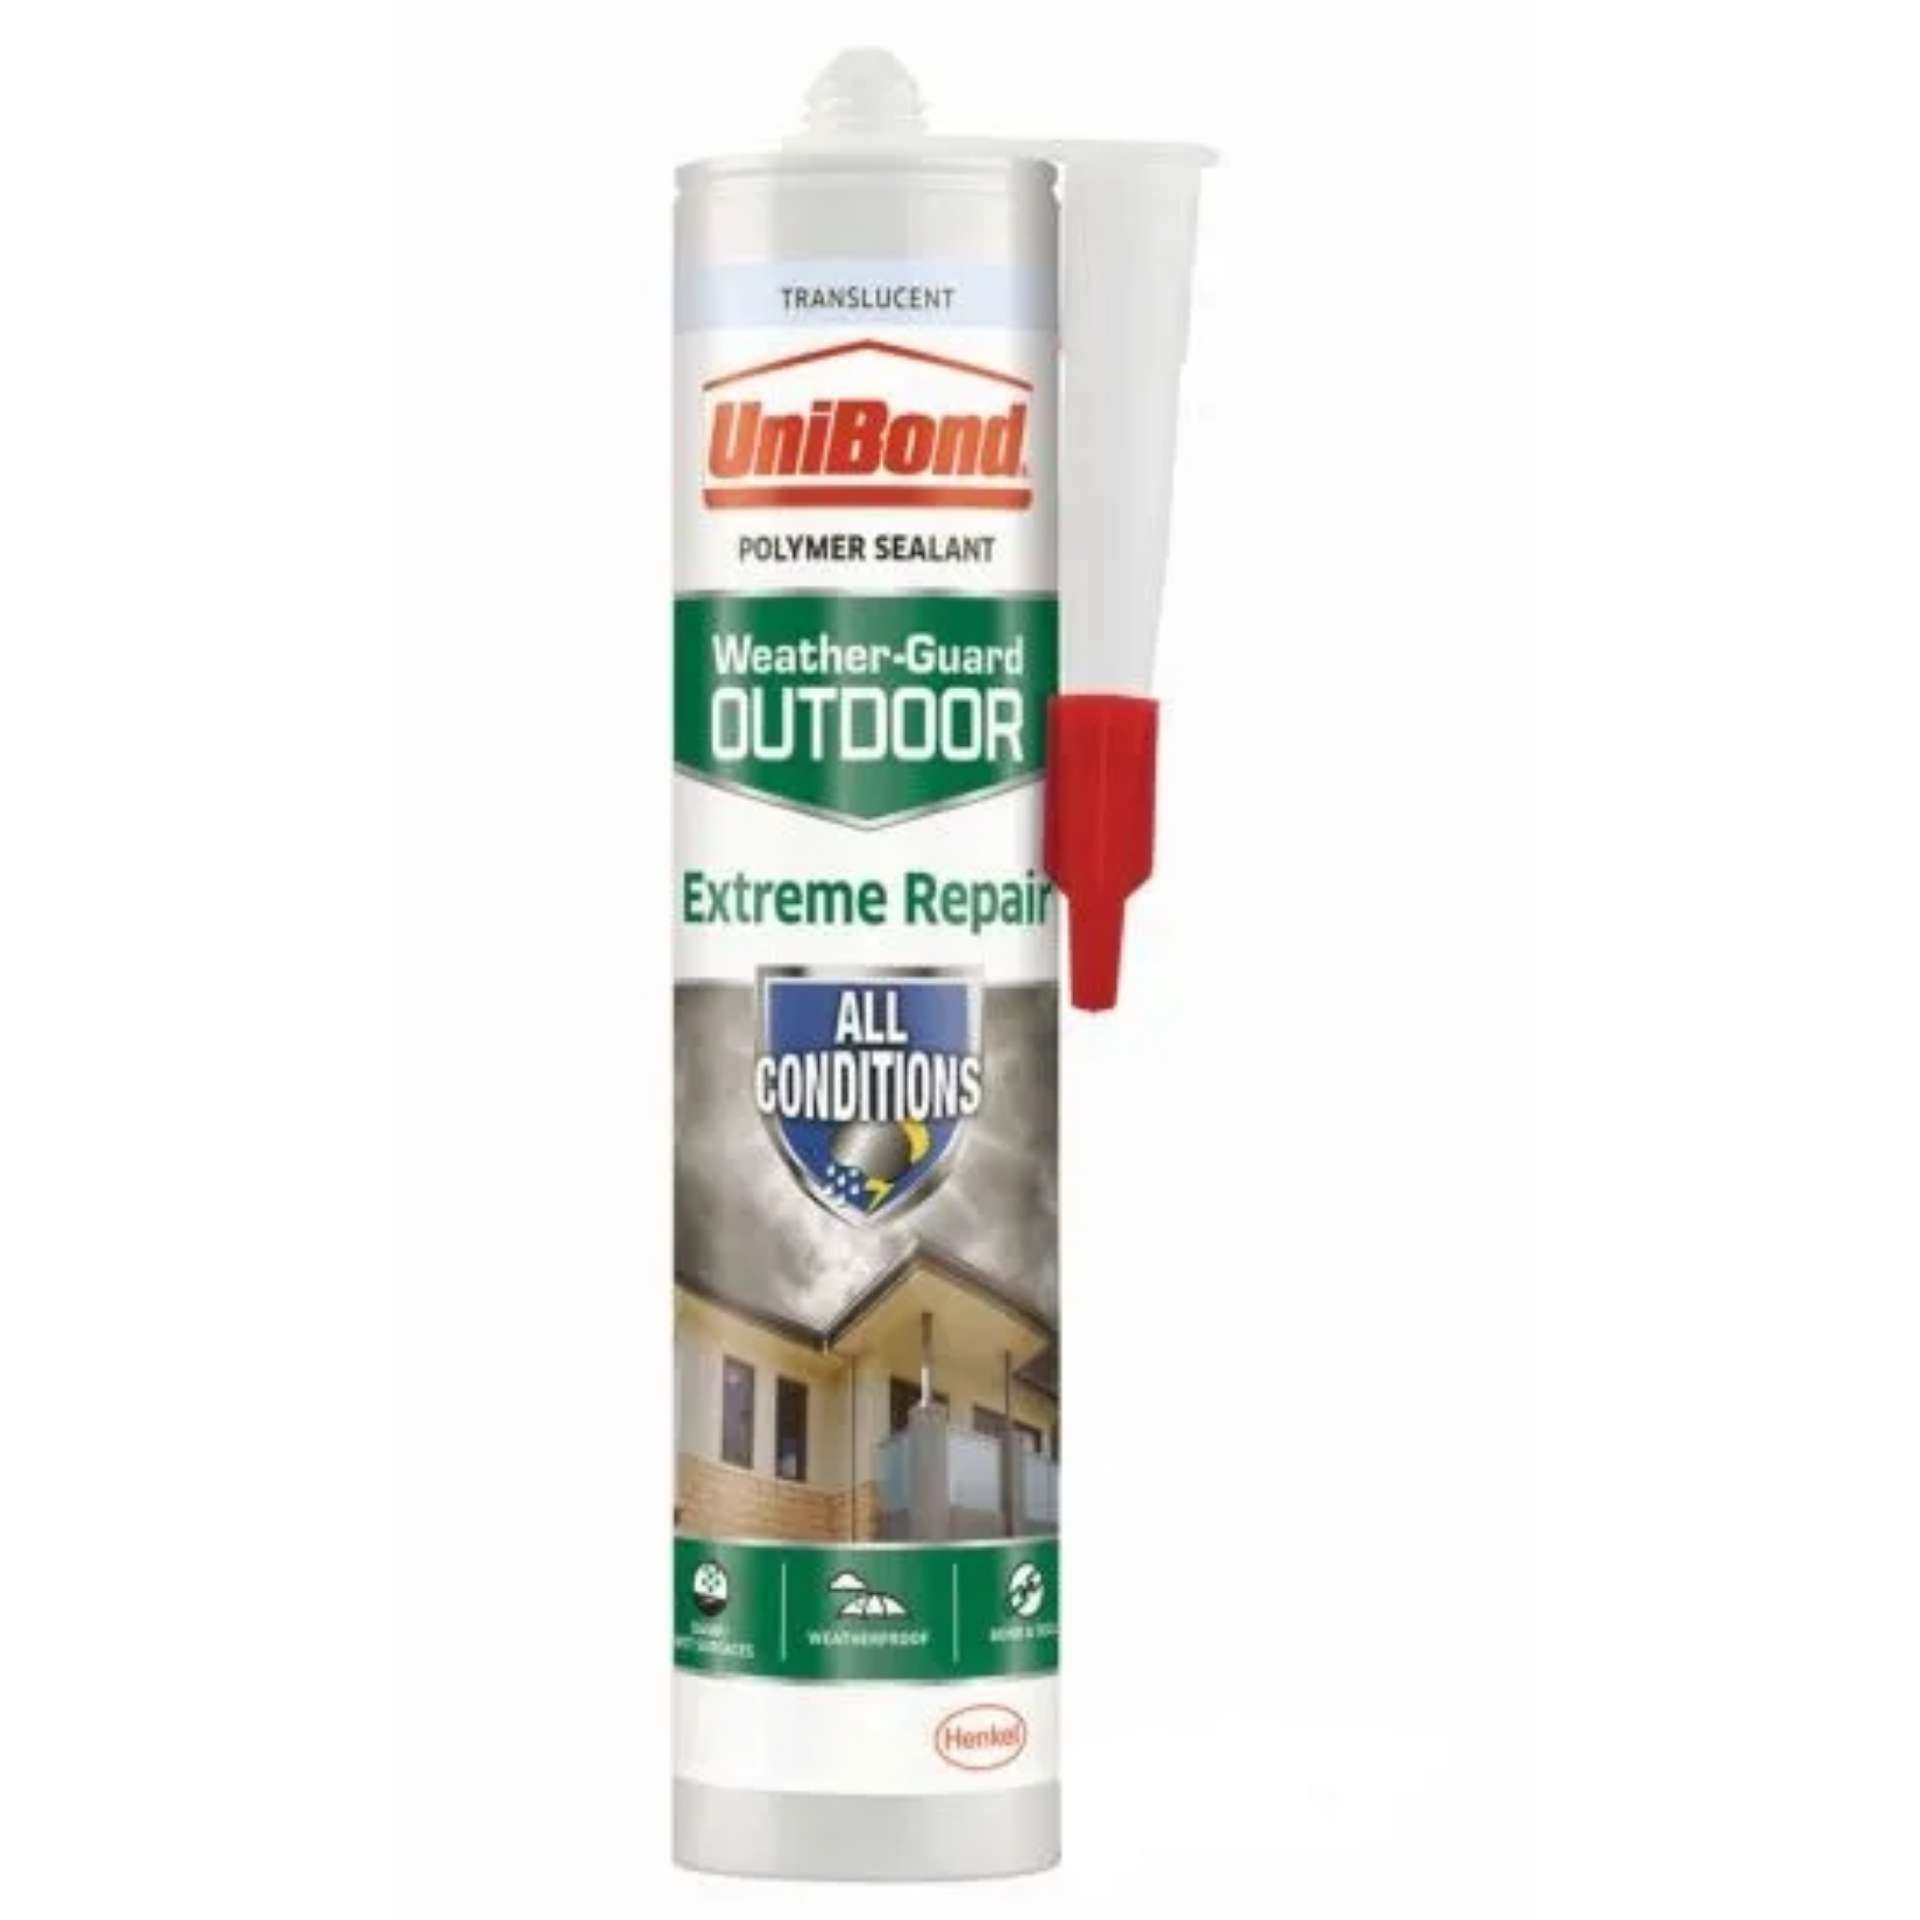 120x UNIBOND POLYMER SEALANT WEATHER GUARD OUTDOOR EXTREME REPAIR ALL CONDITIONS 294G (PLEASE NOTE